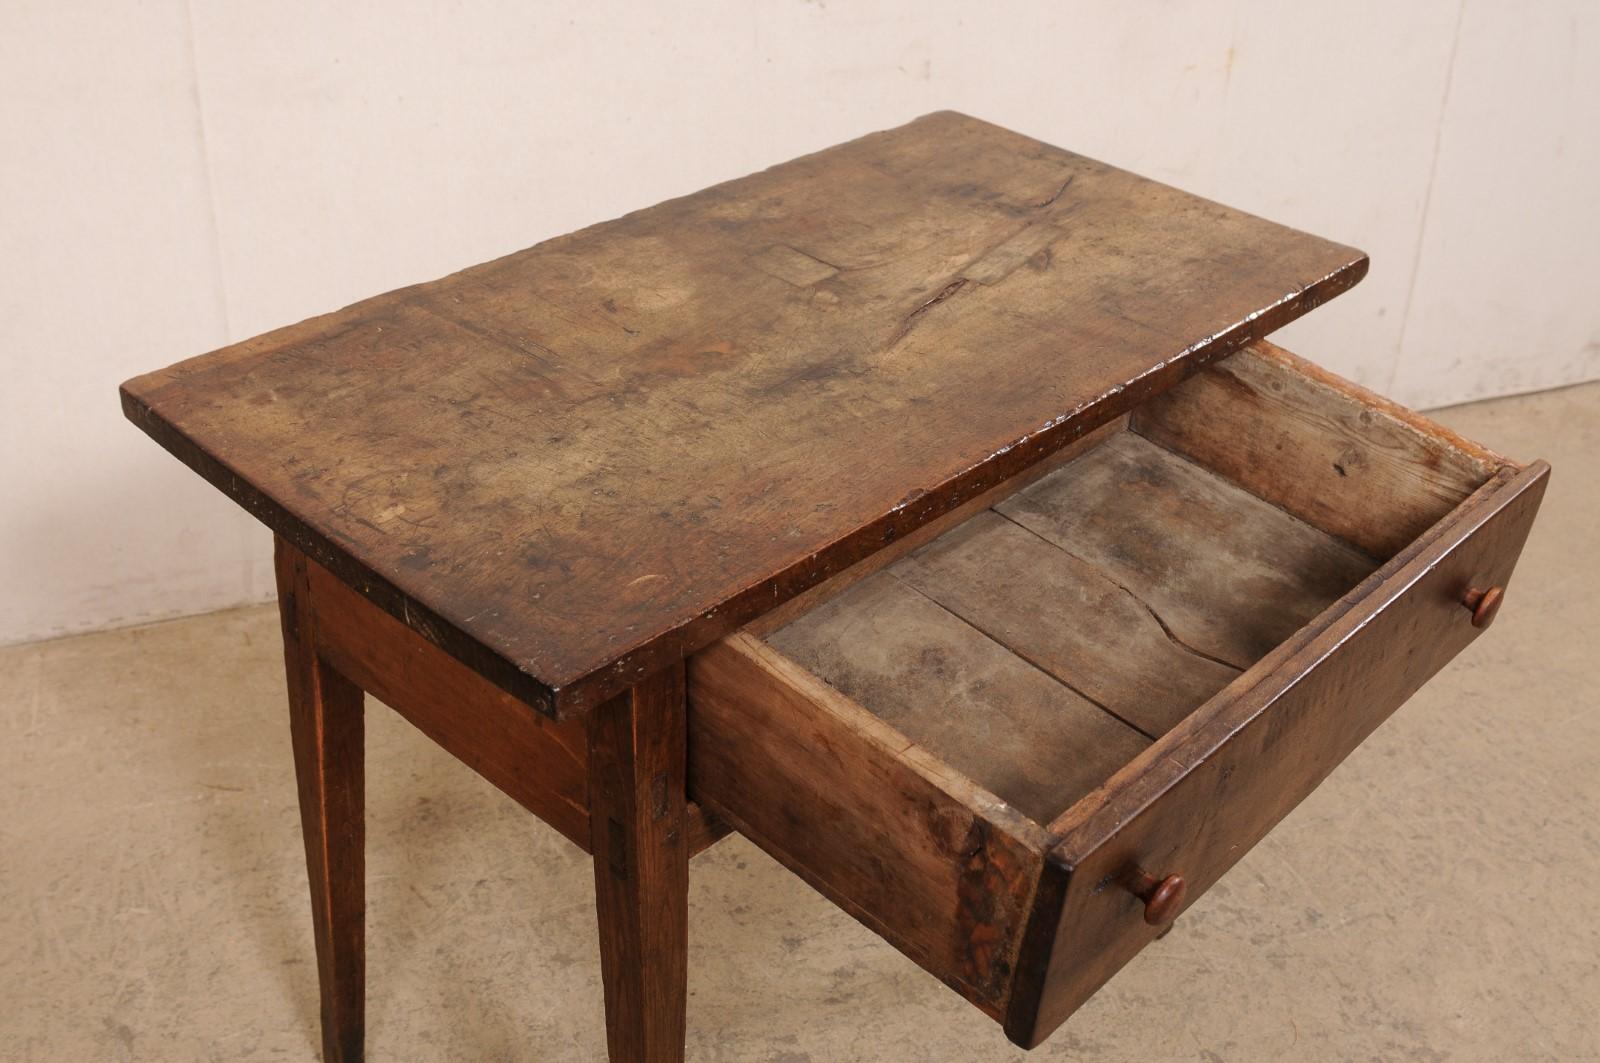 18th C. Spanish Carved-Walnut Table w/Drawer (Top has Fabulous Old Patina!) For Sale 1